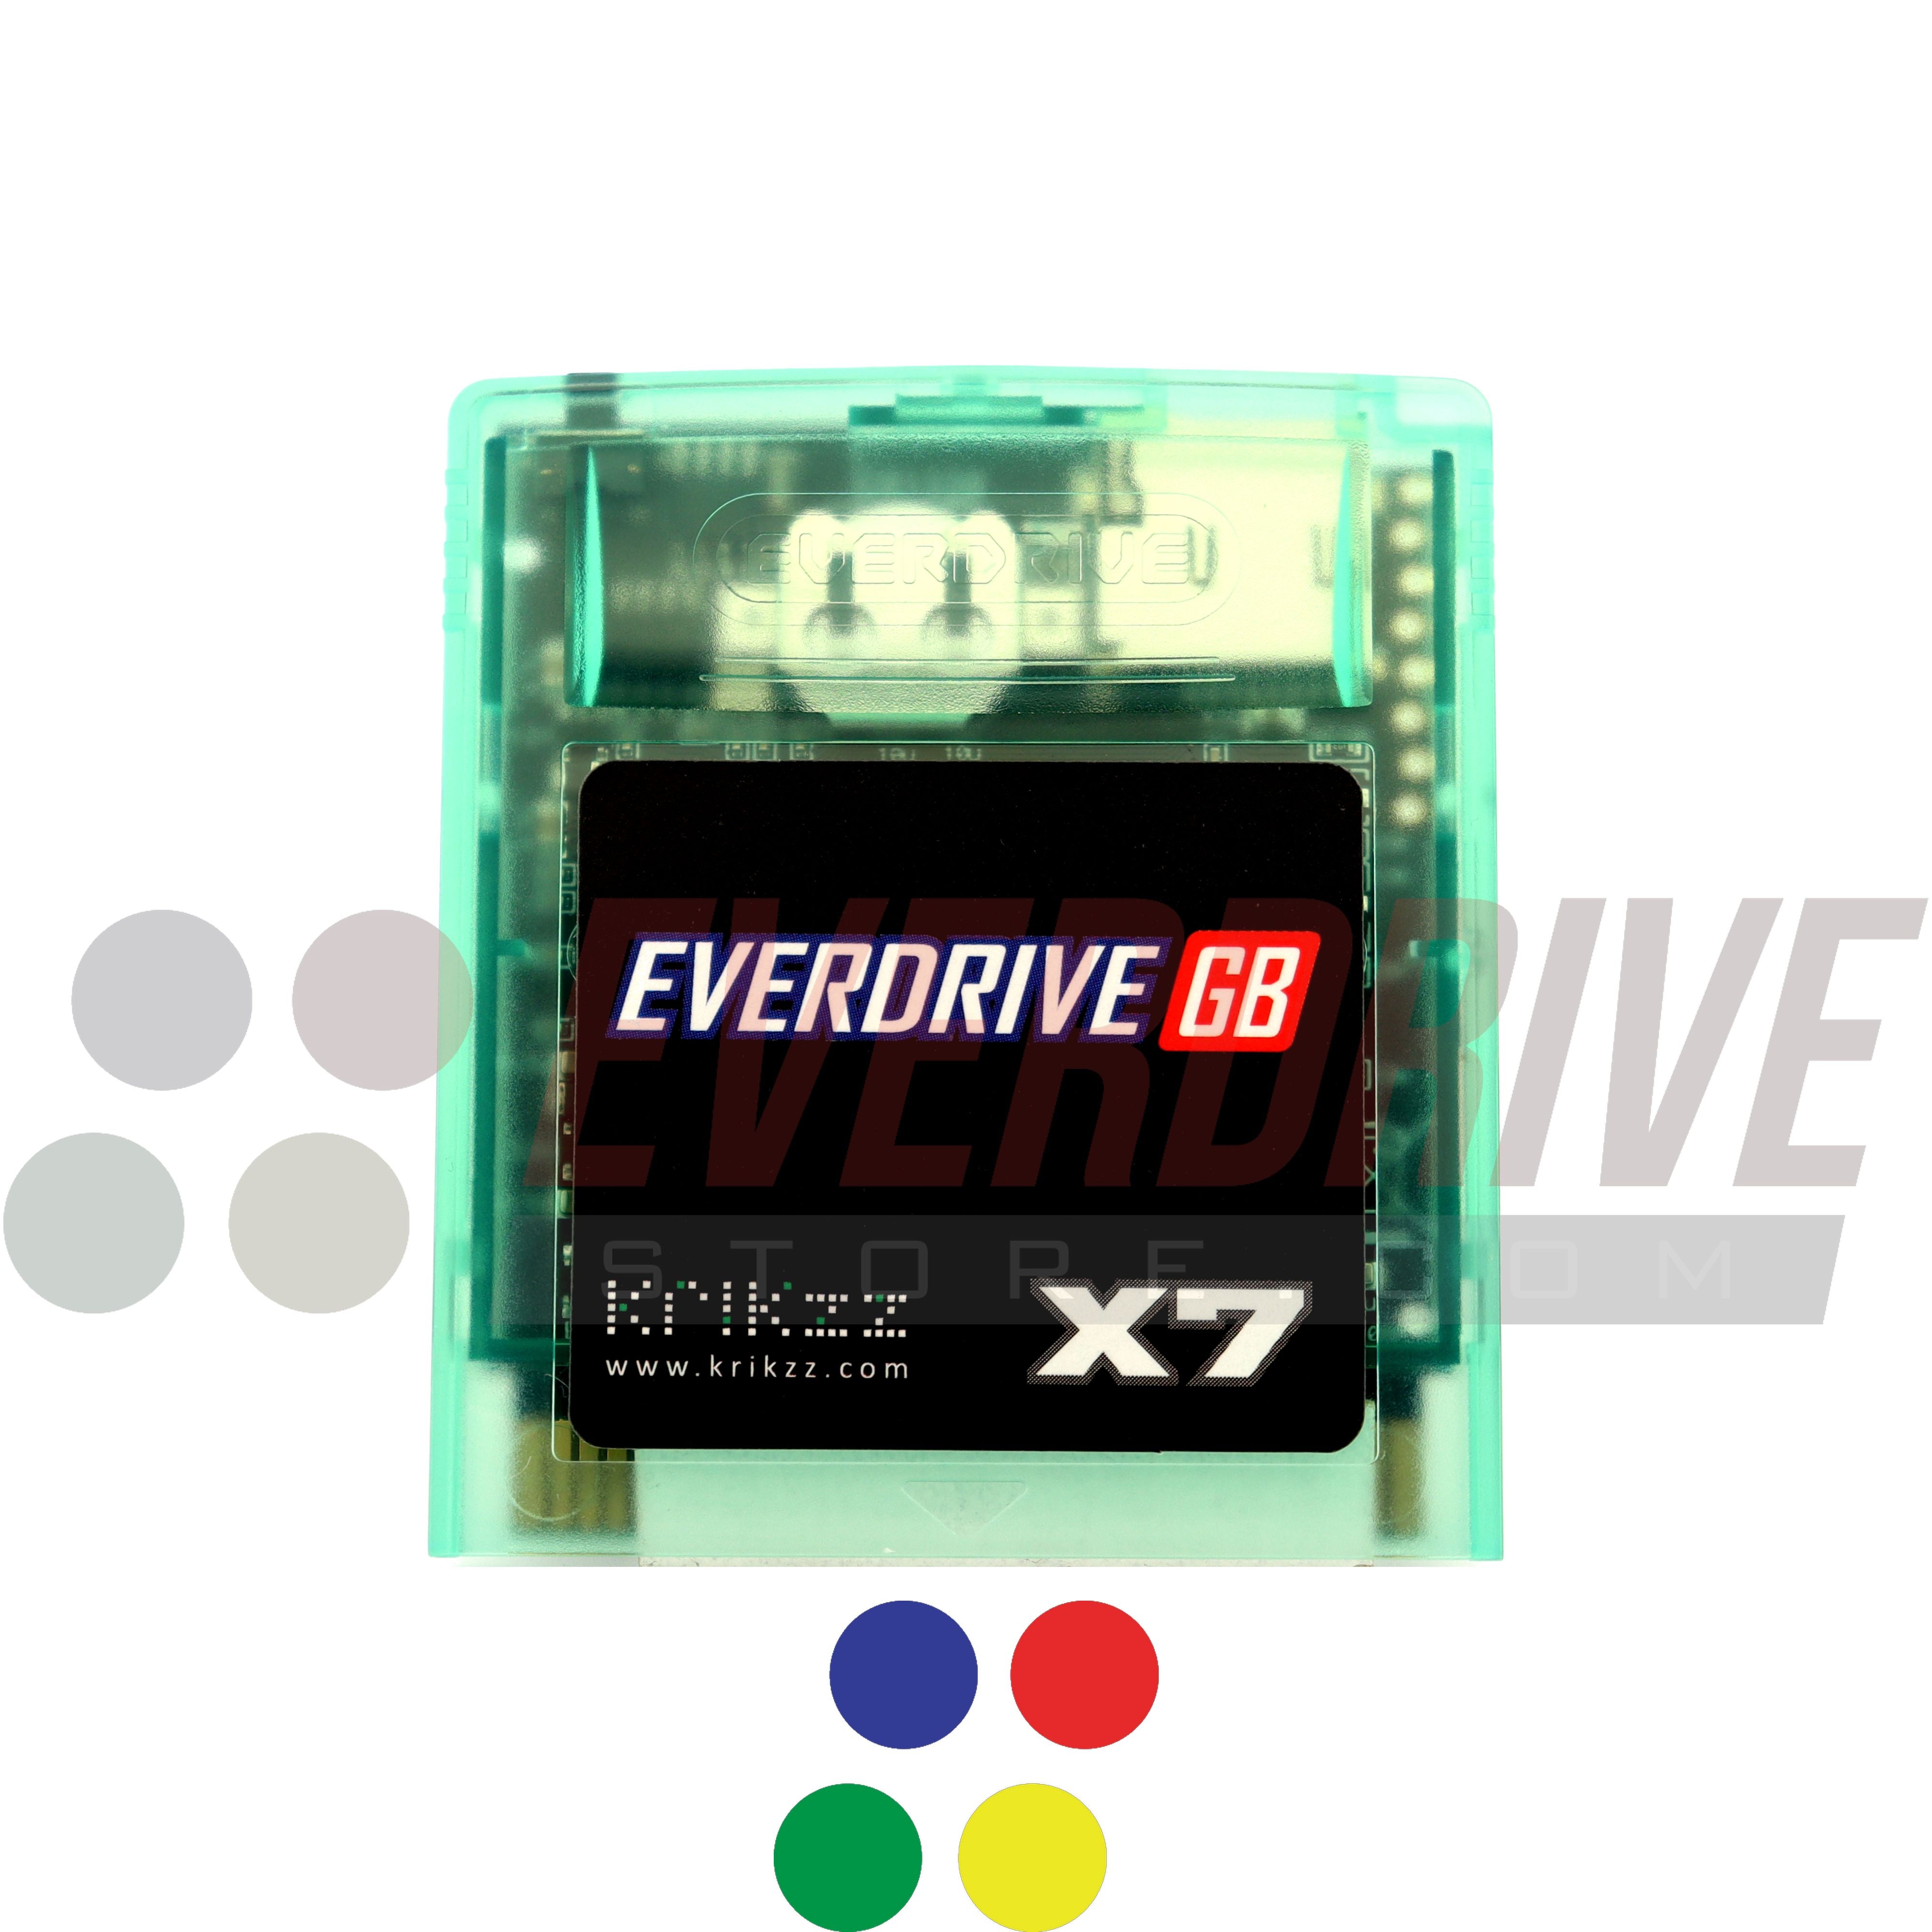 Everdrive GB X7 - Frosted Green – EverdriveStore.com